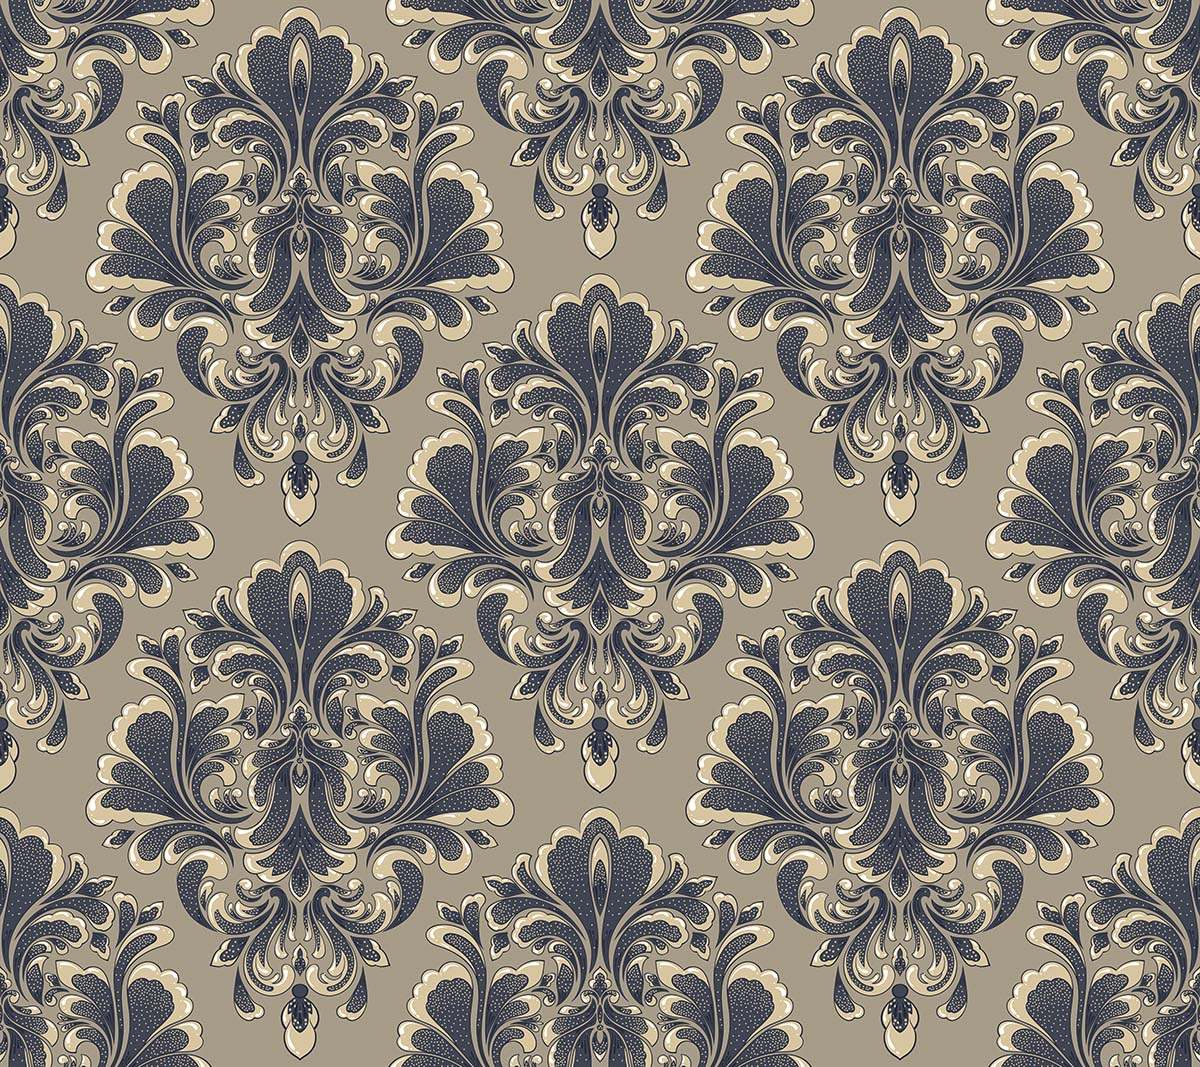 A pattern of blue and white floral designs